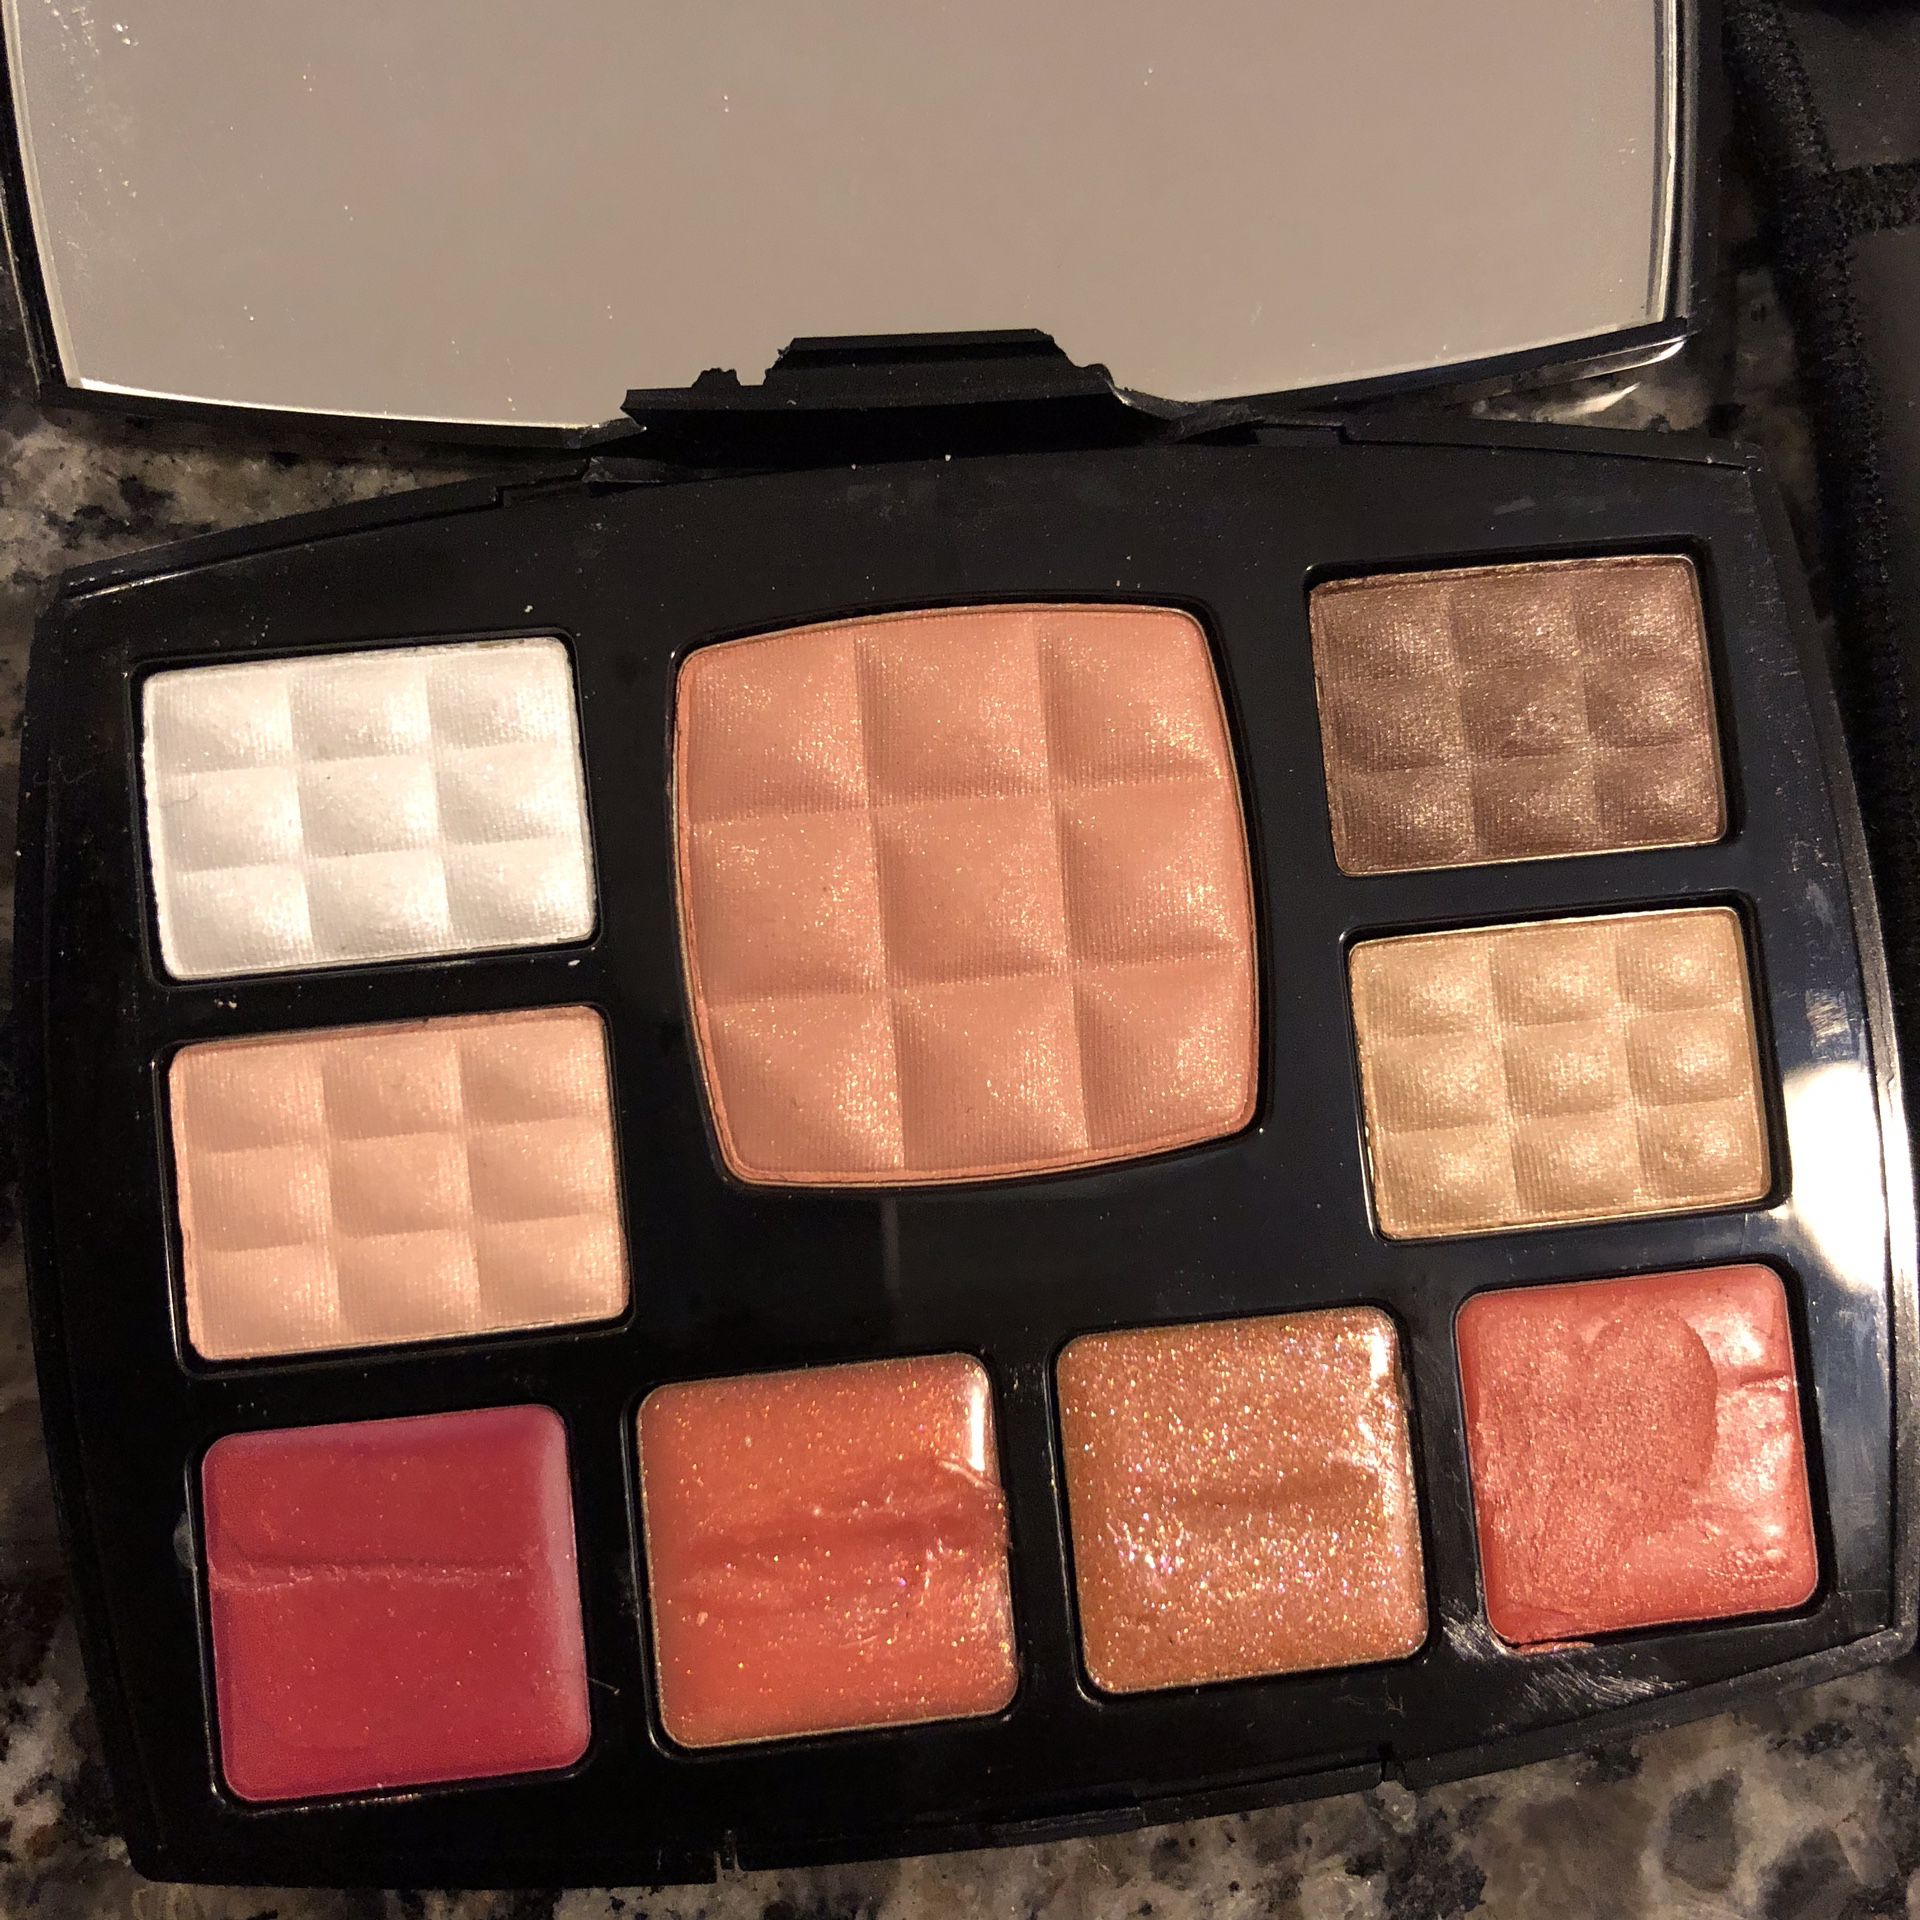 Chanel makeup palette for Sale in Henderson, NV - OfferUp